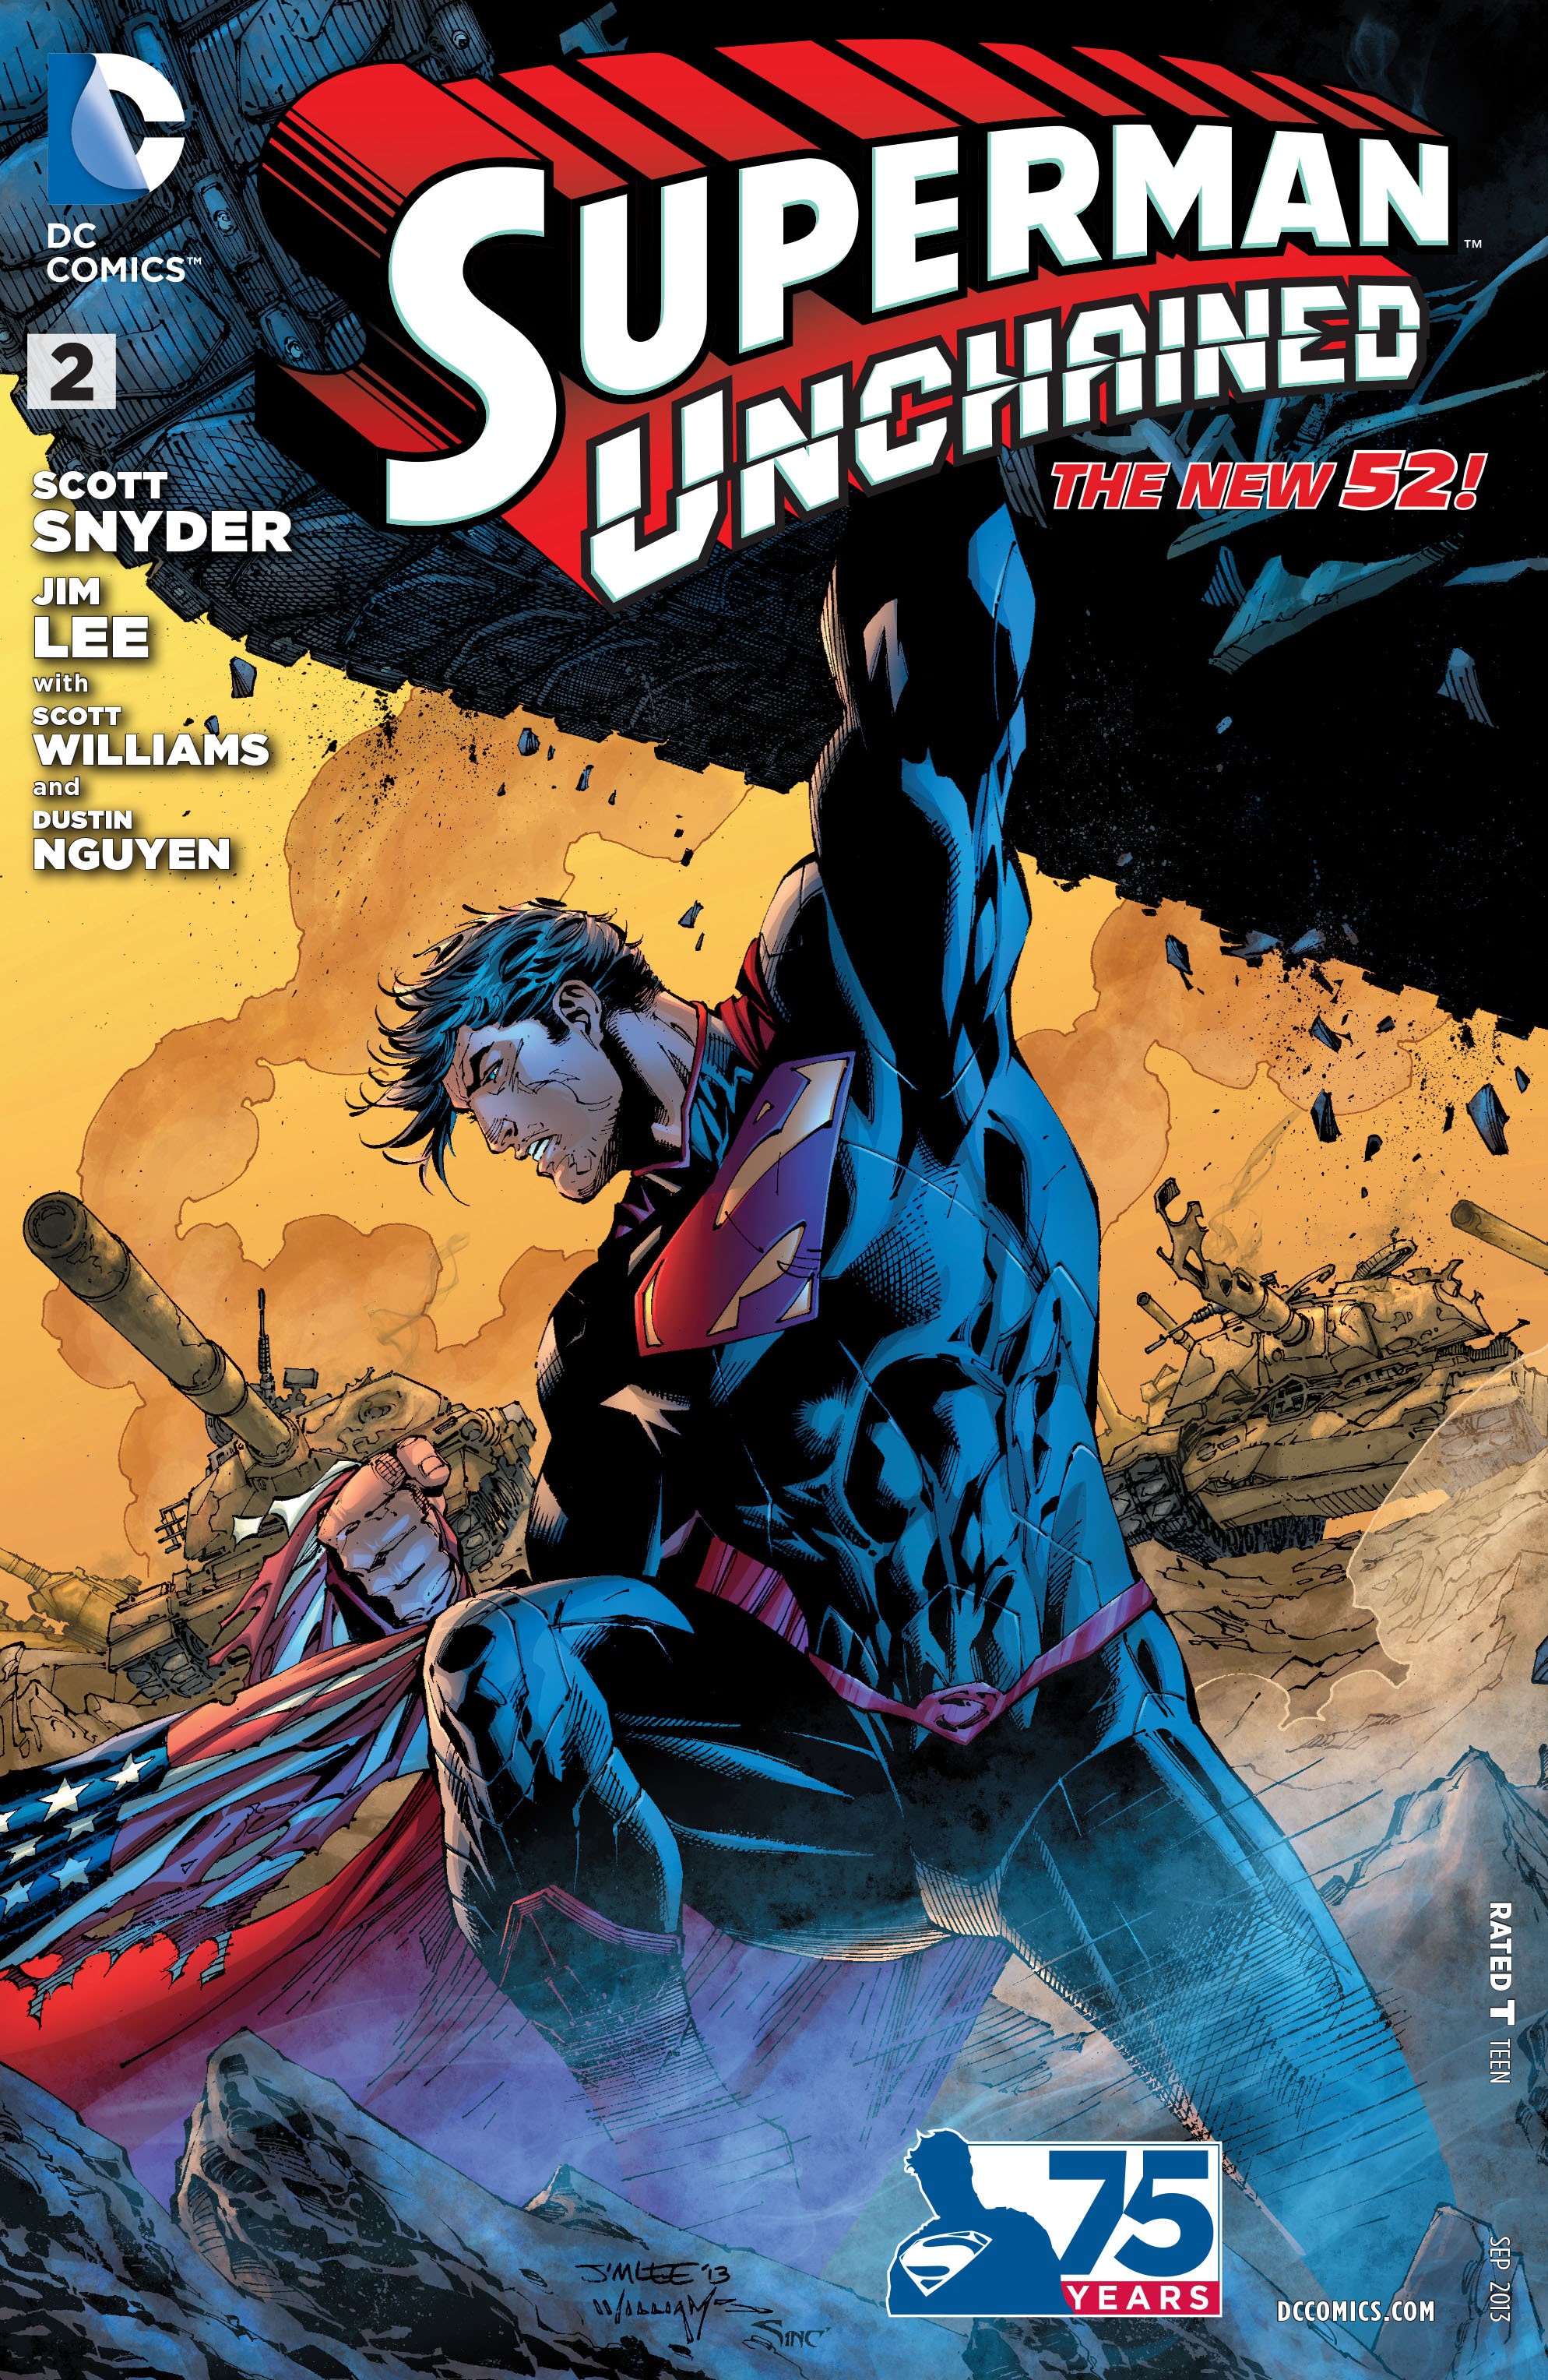 Superman Unchained Vol. 1 #2